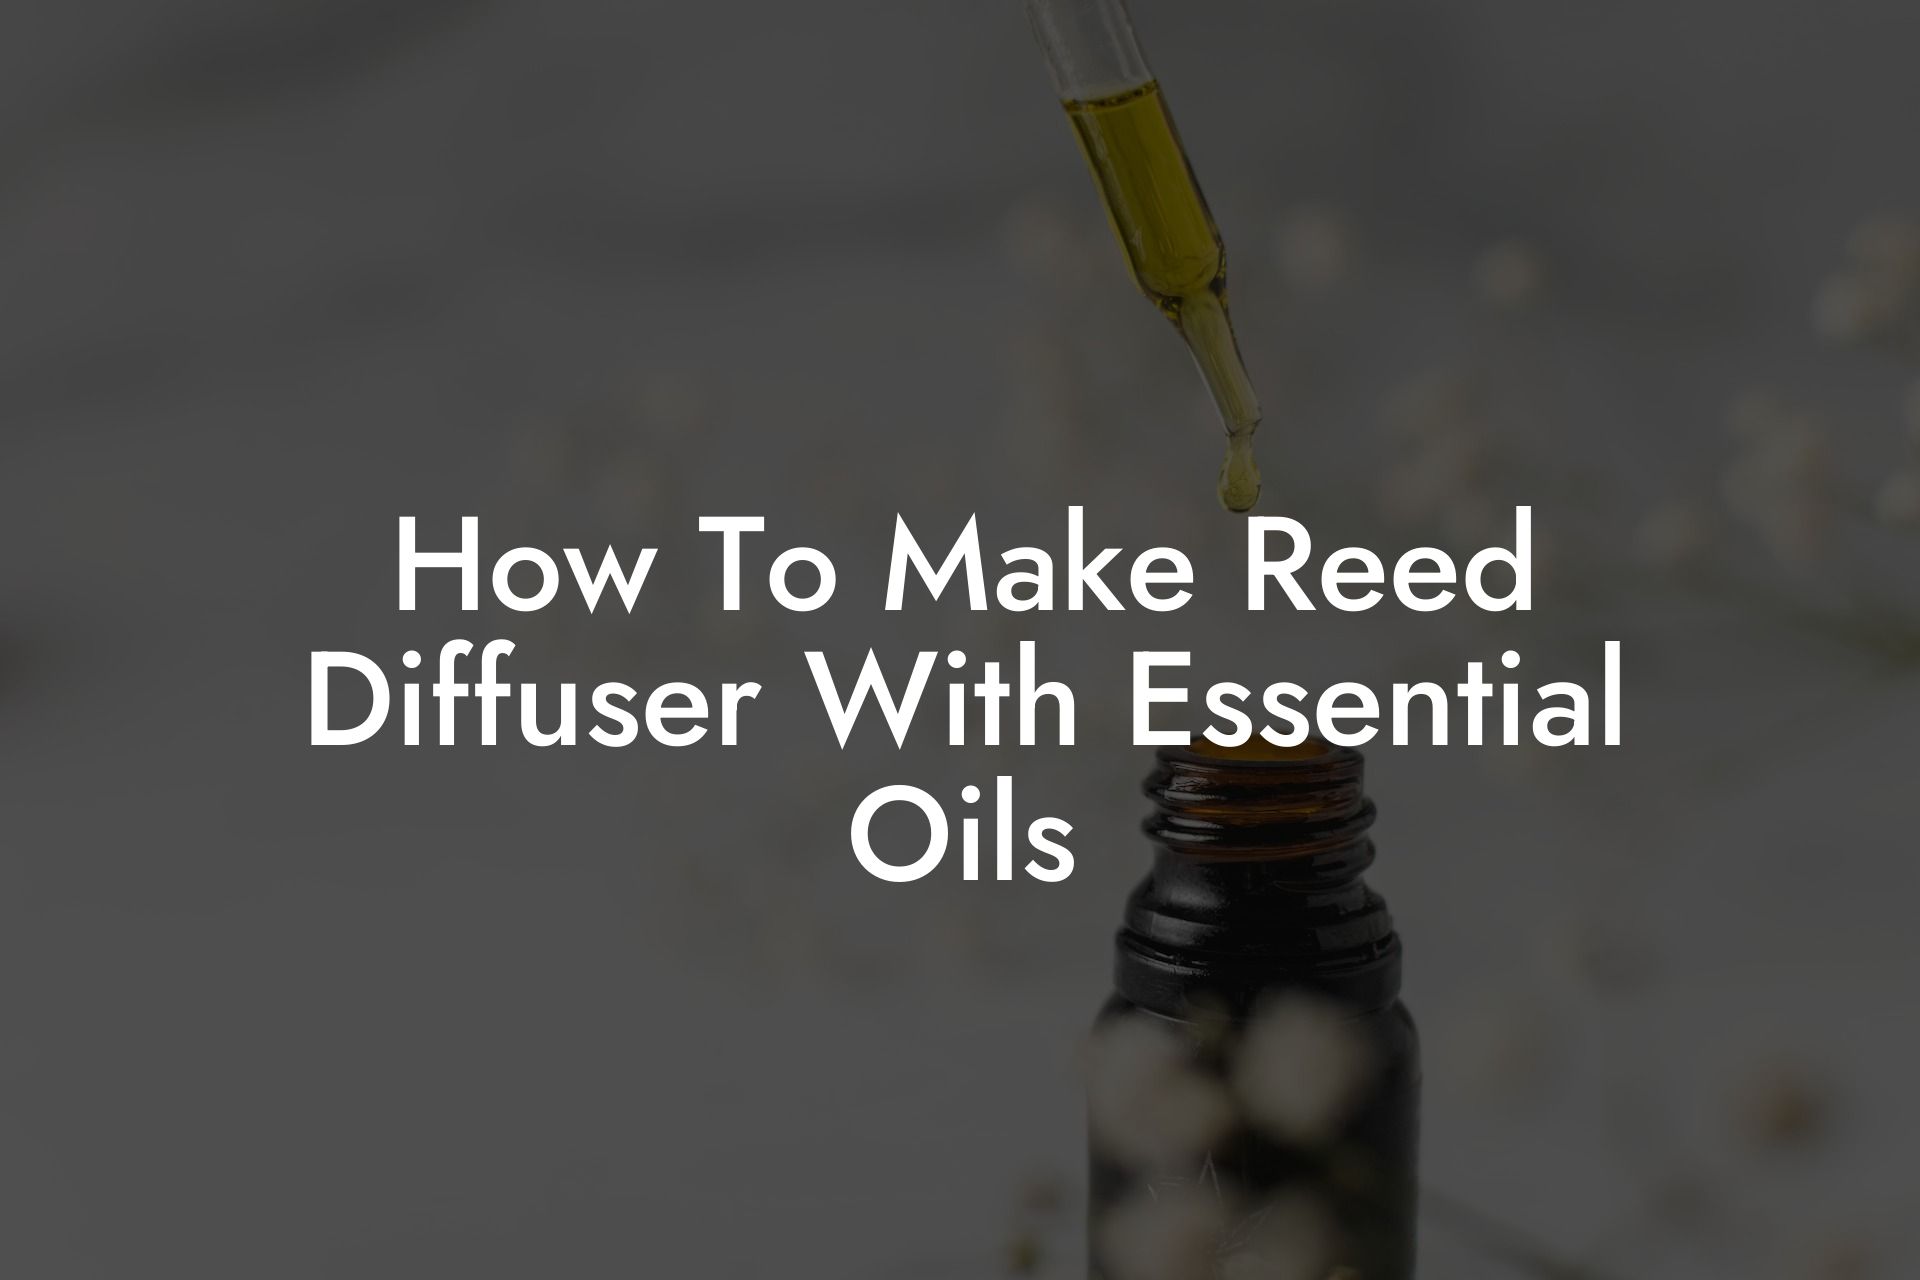 How To Make Reed Diffuser With Essential Oils